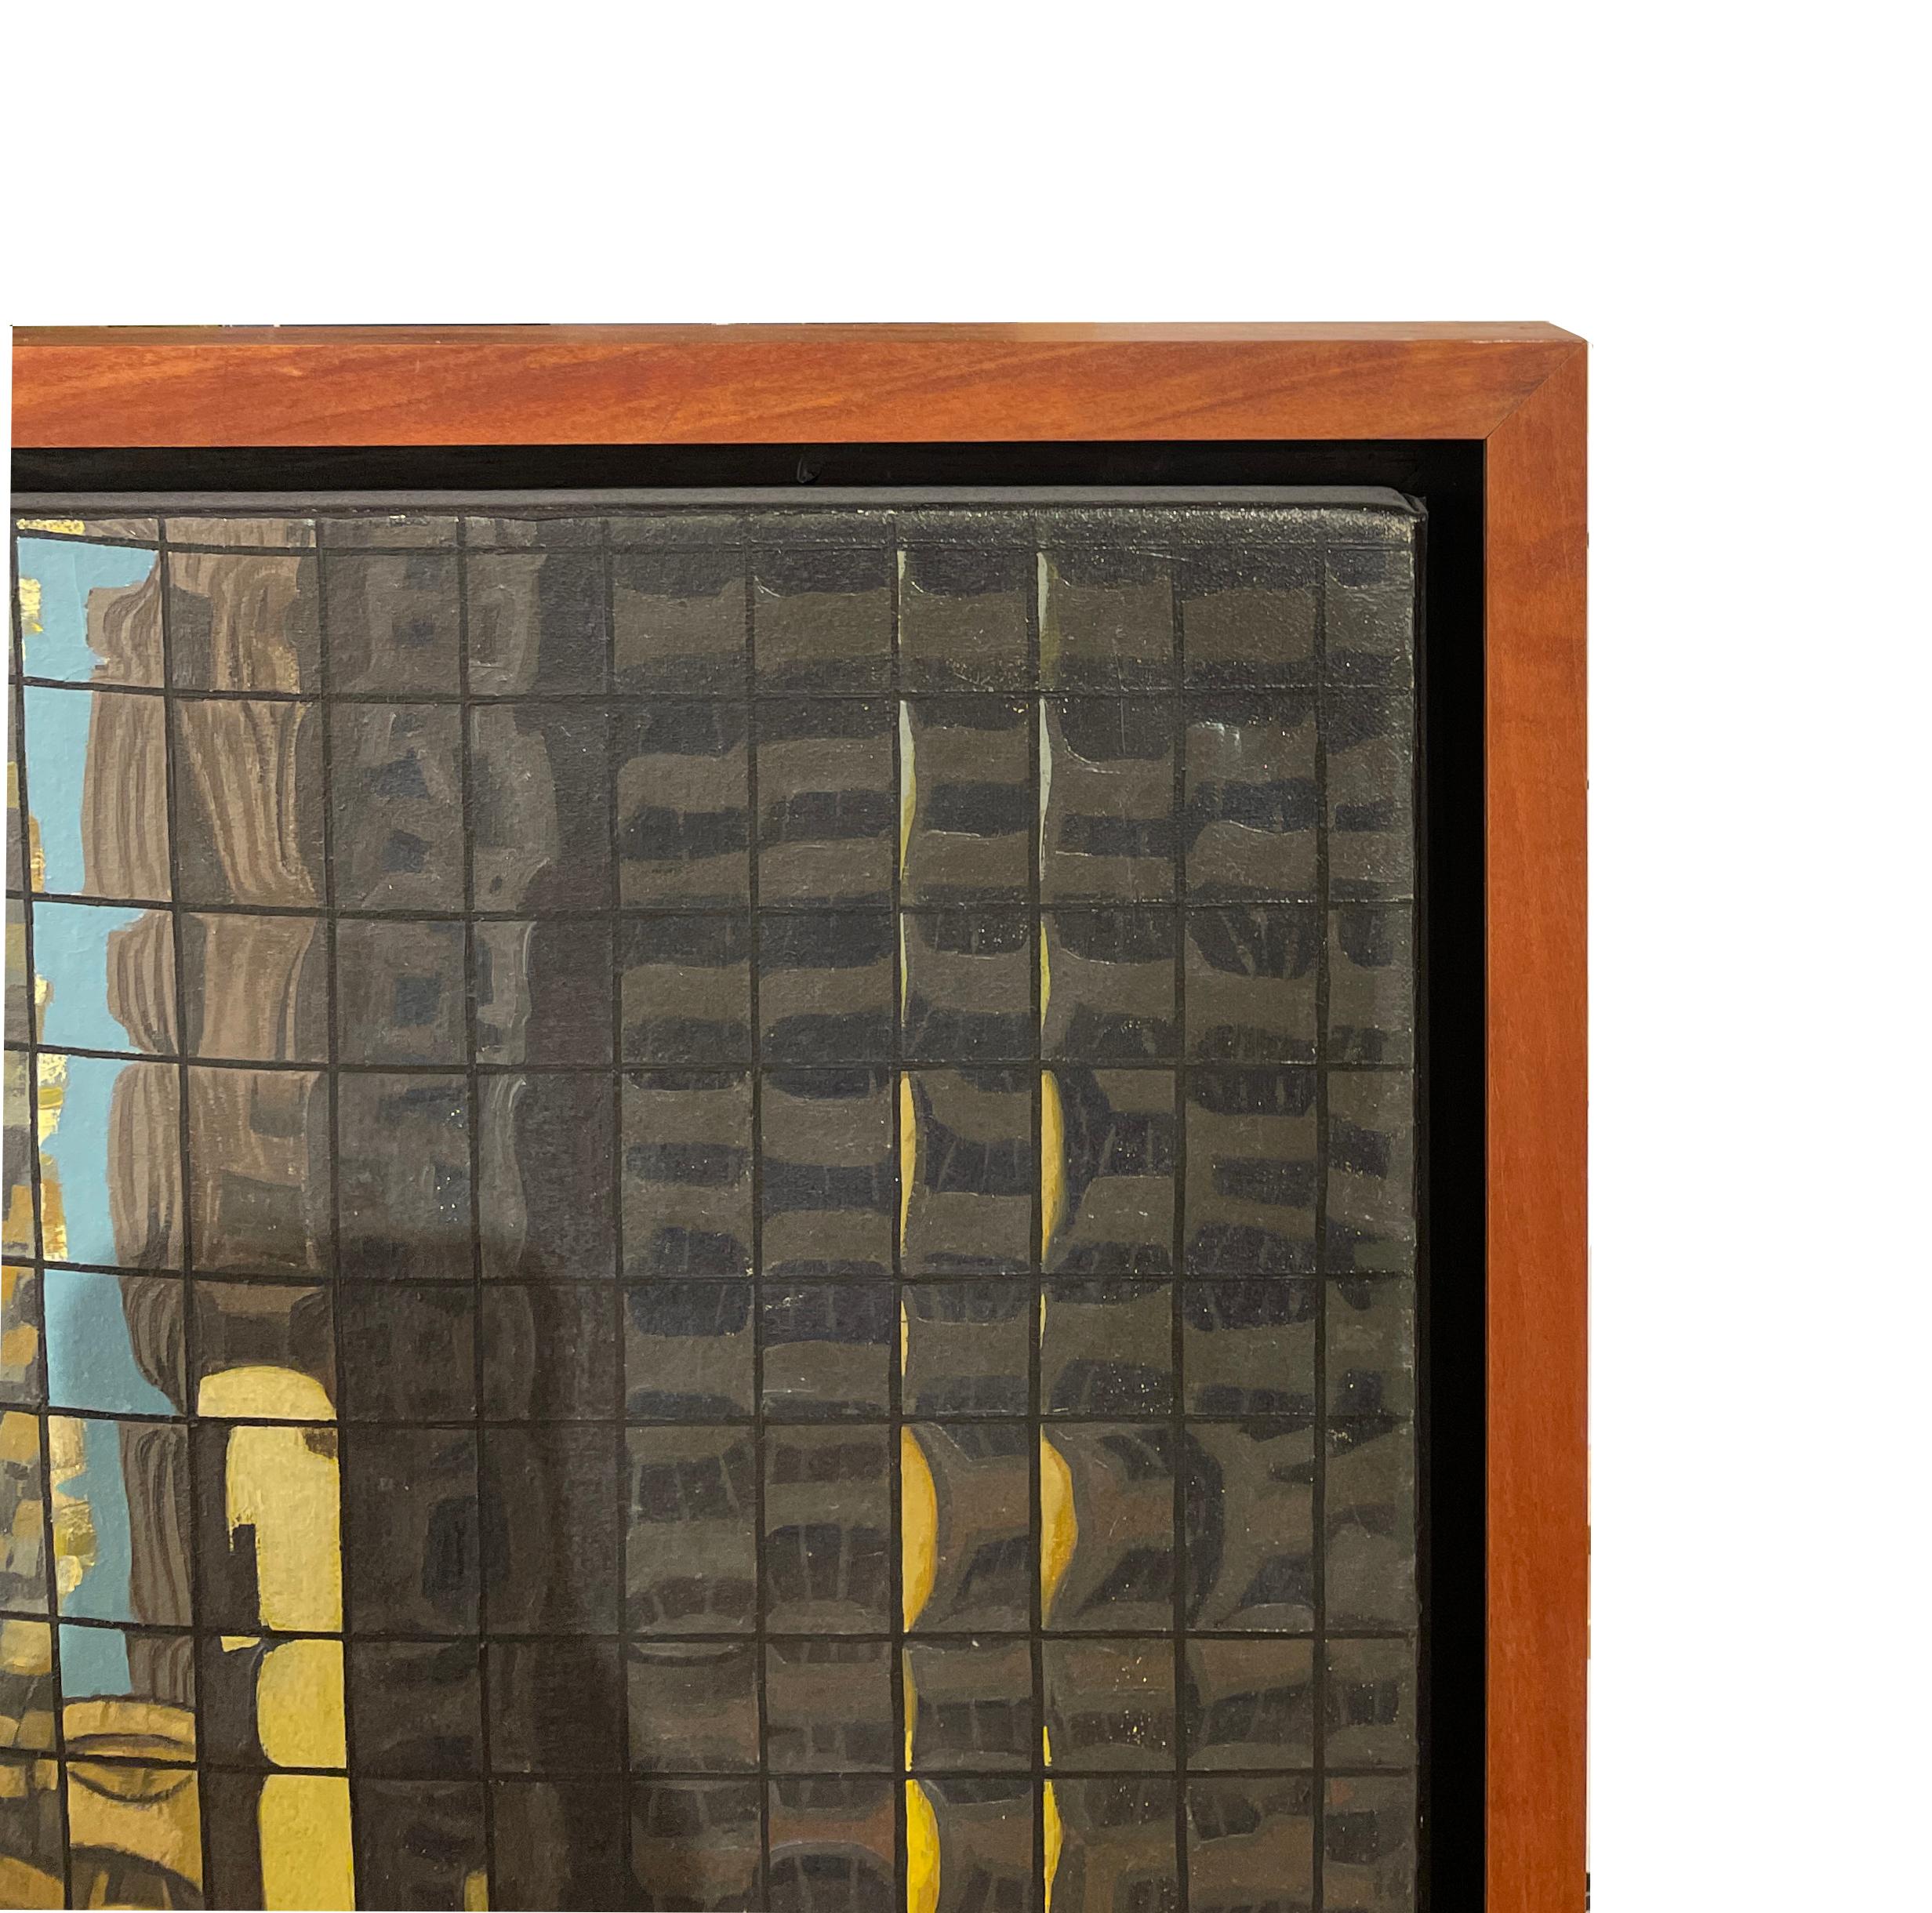 Deconstruction- Chicago Loop Architecture Reflecting on Building, Oil on Linen 1